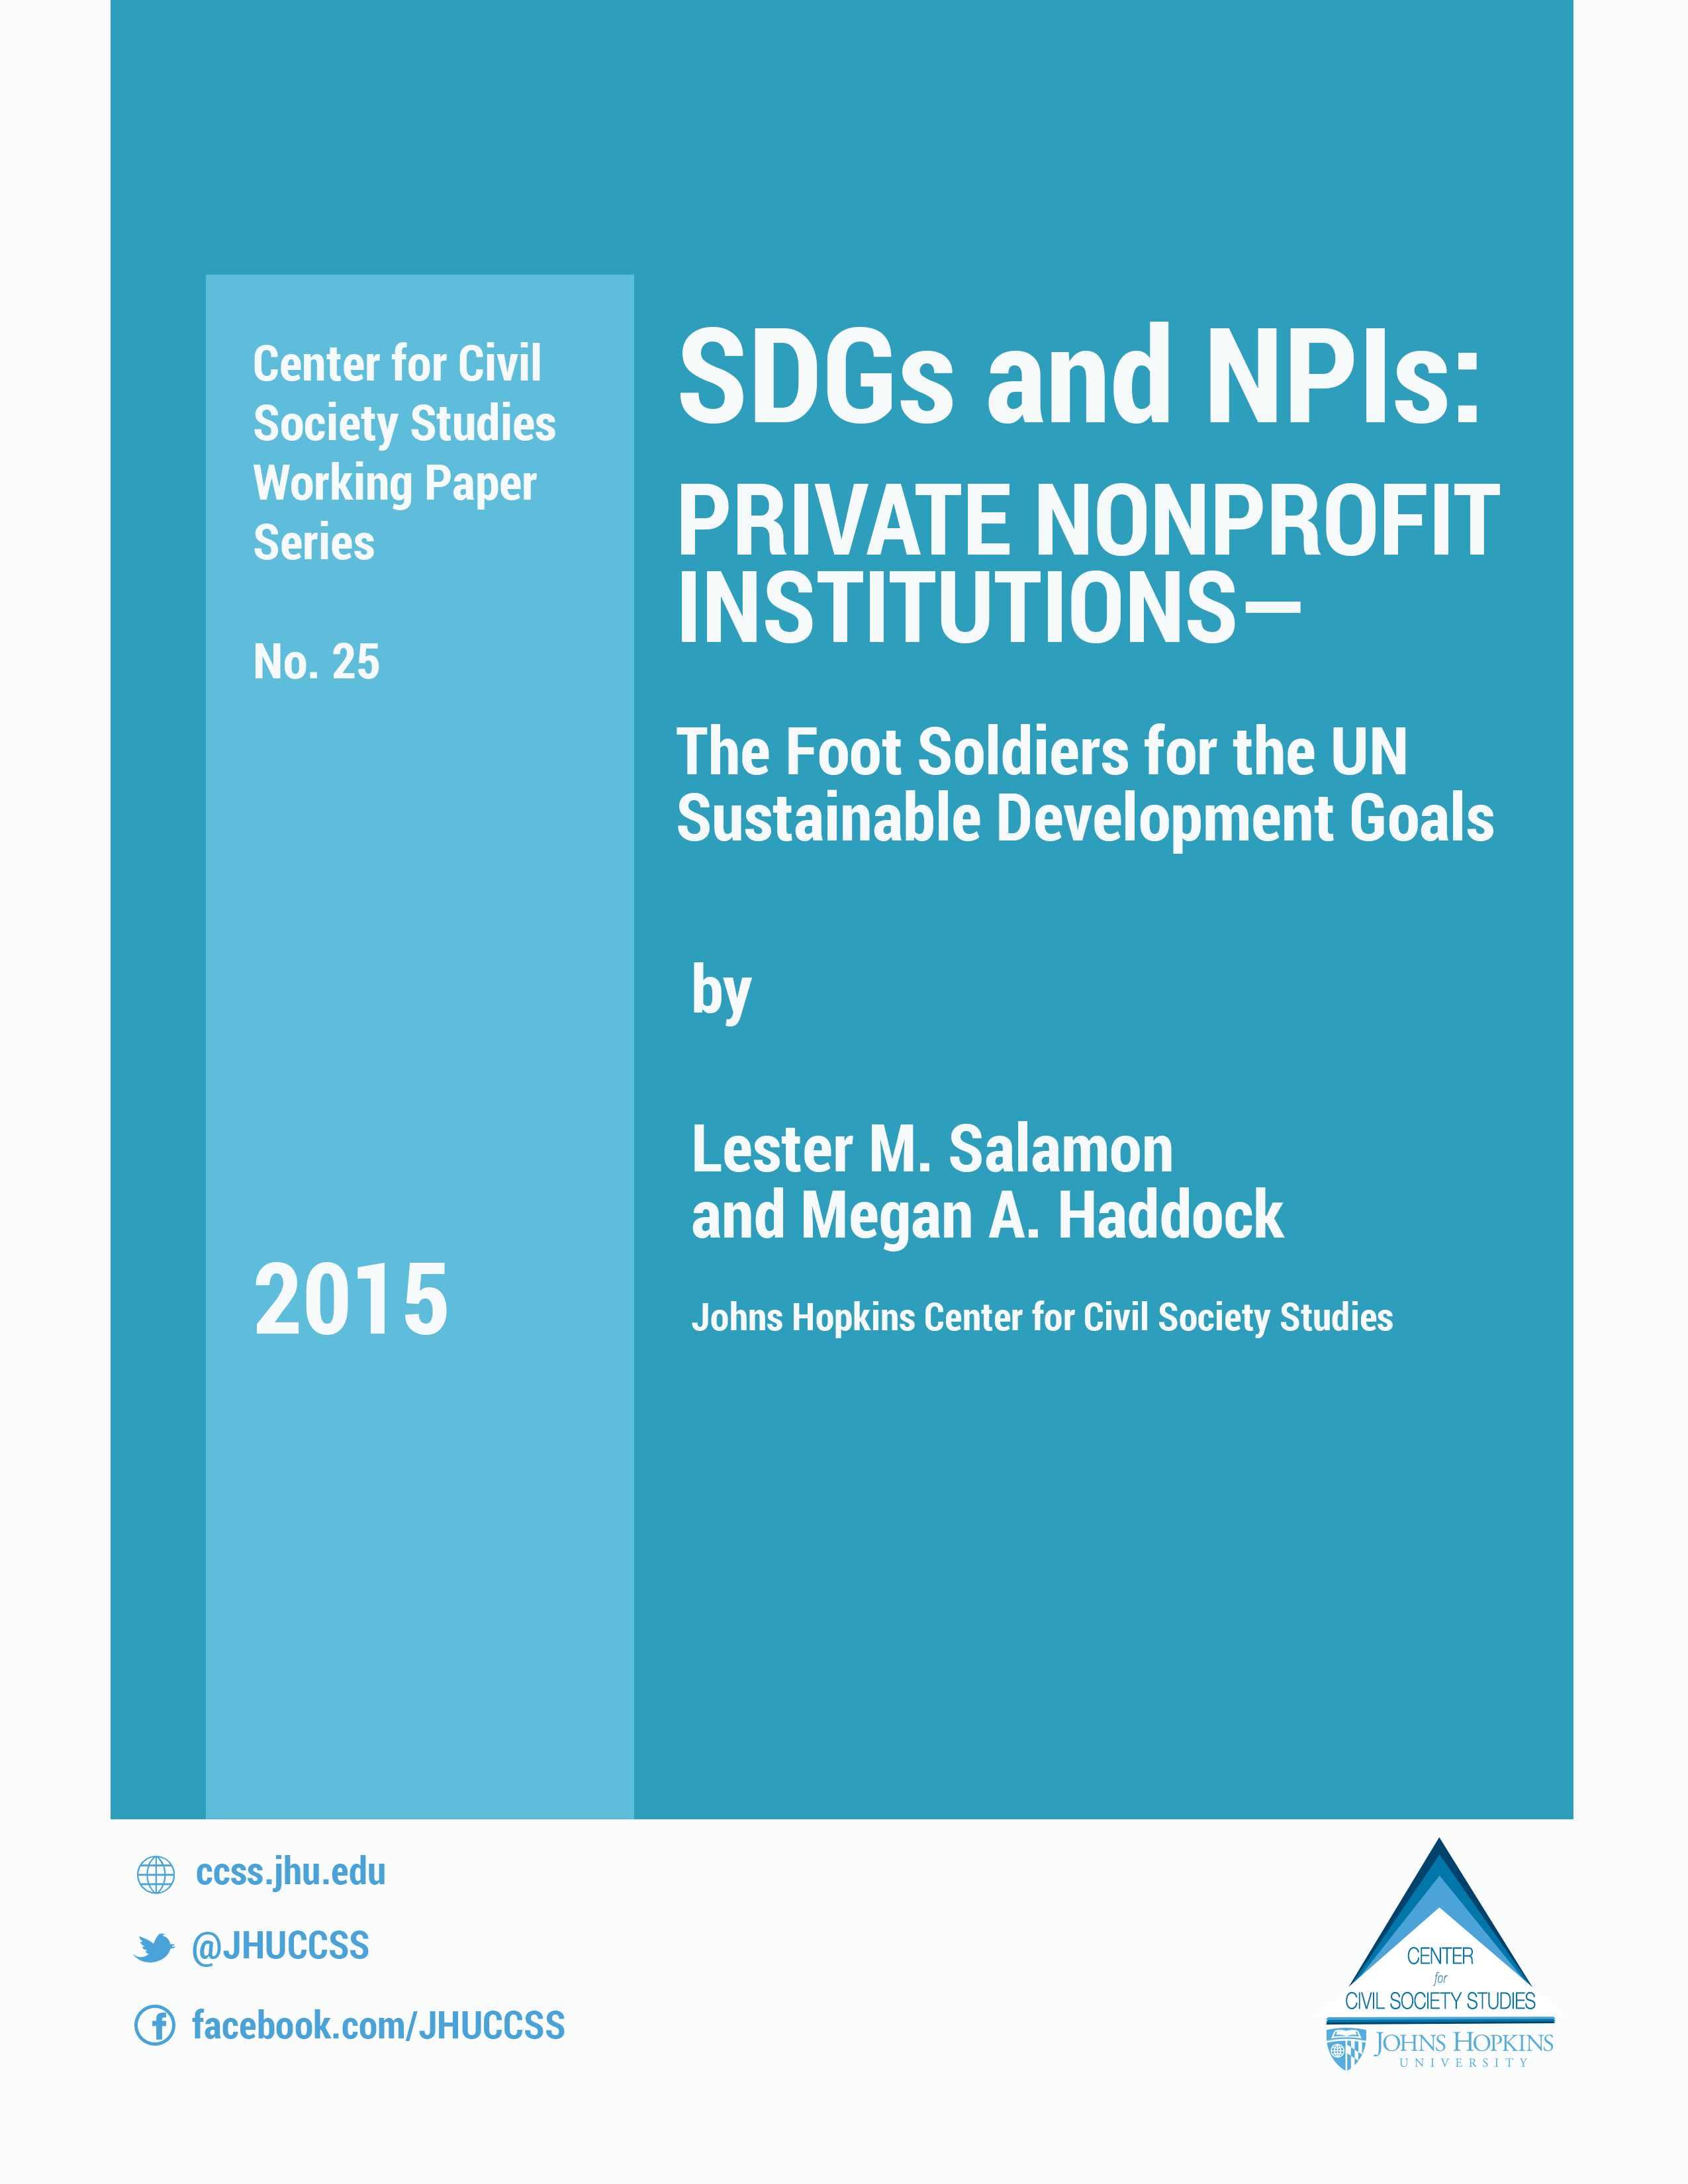 SDGs and NPIs: Private Nonprofit Institutions - The foot soldiers for the UN Sustainable Development Goals (2015)